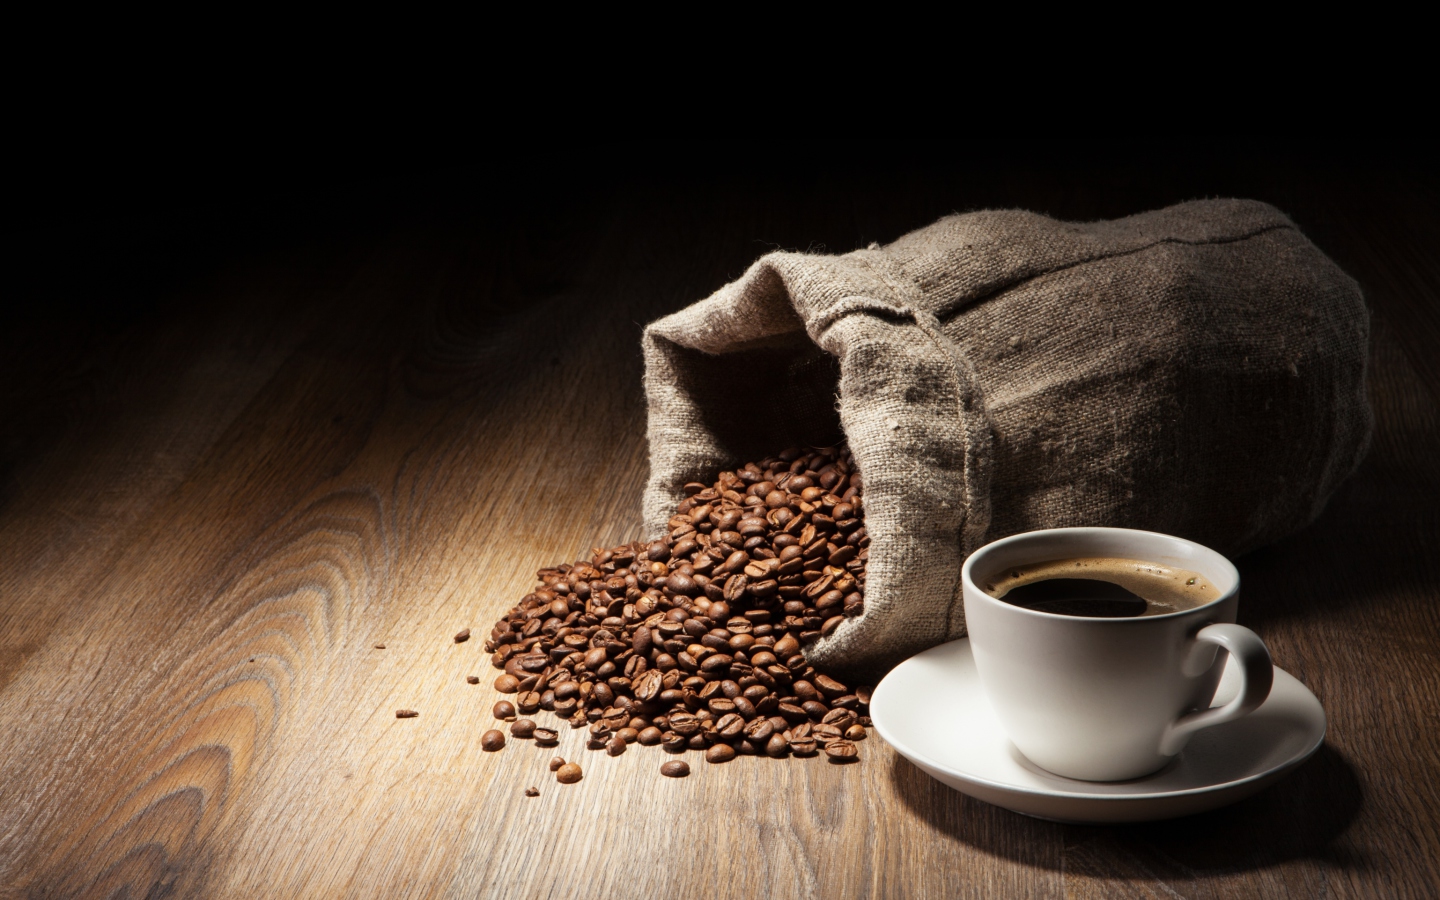 Still Life With Coffee Beans wallpaper 1440x900